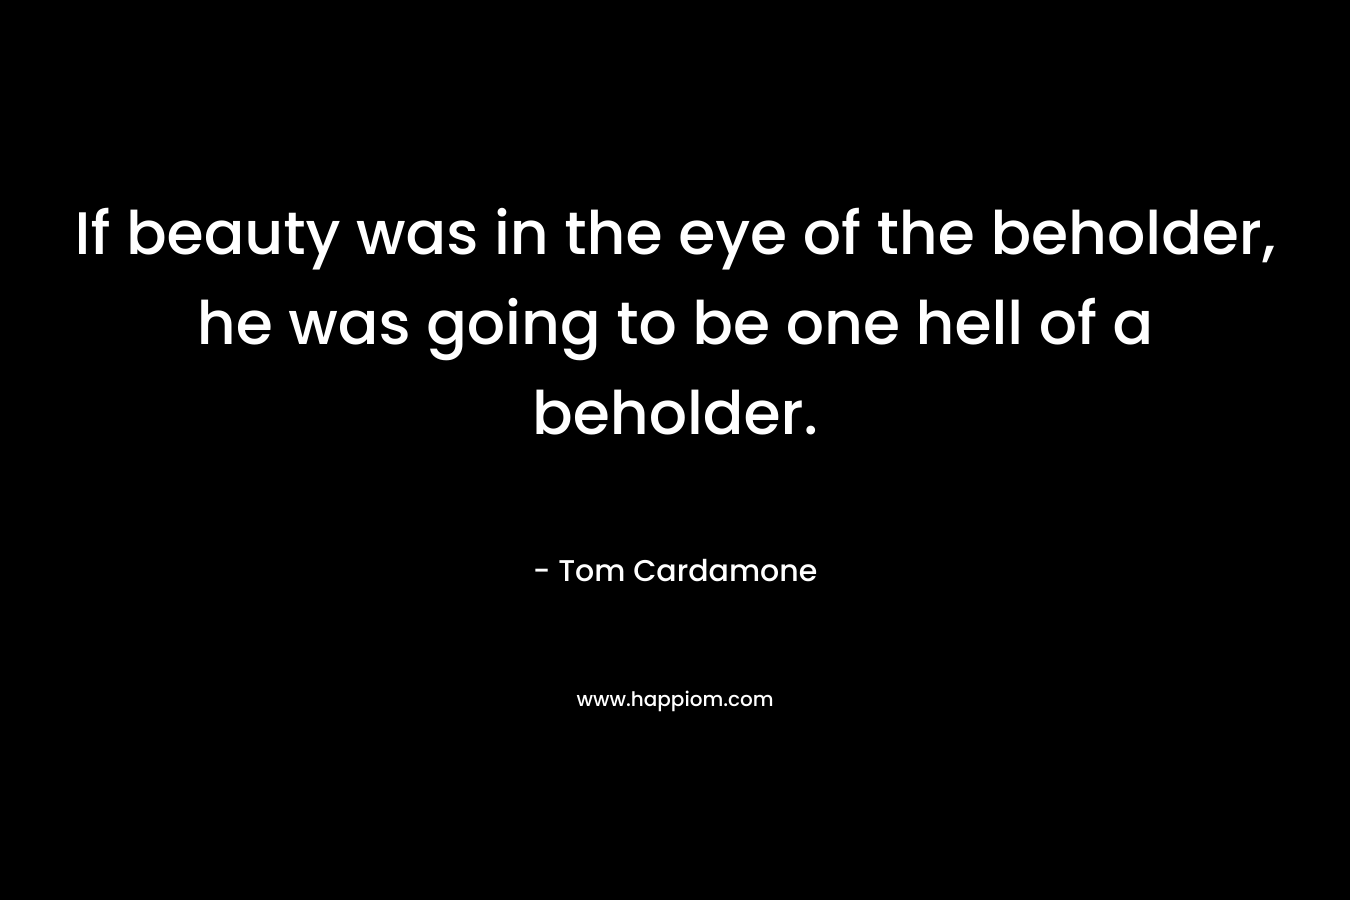 If beauty was in the eye of the beholder, he was going to be one hell of a beholder. – Tom Cardamone